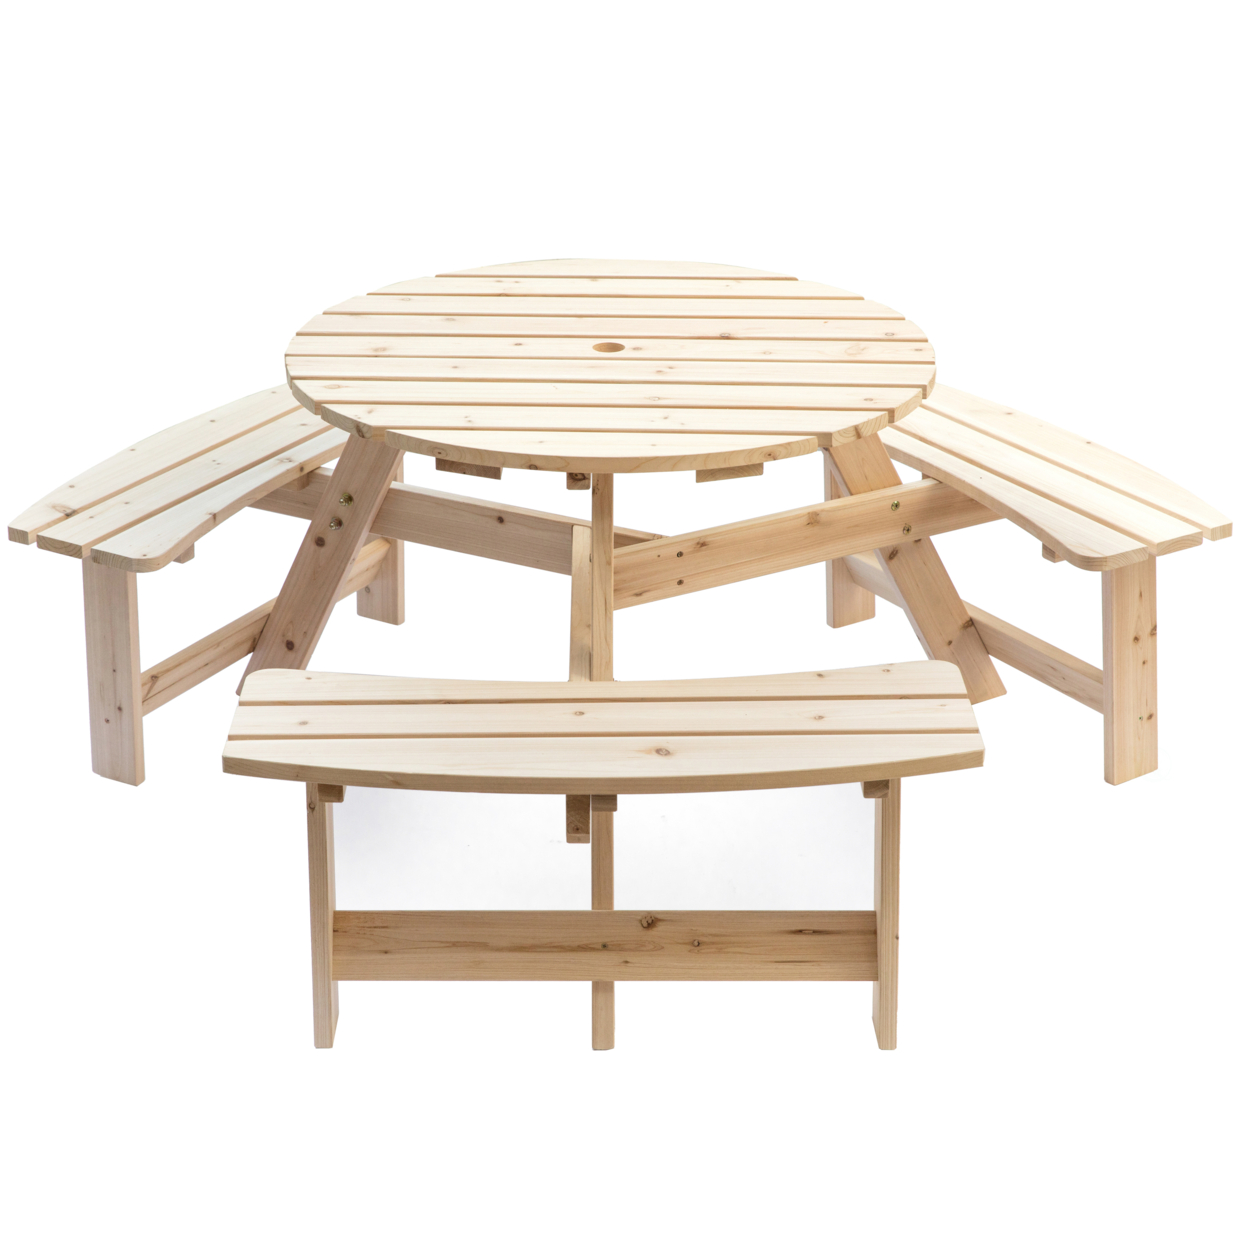 Wooden Outdoor Round Picnic Table With Bench For Patio, 6- Person With Umbrella Hole - Stained